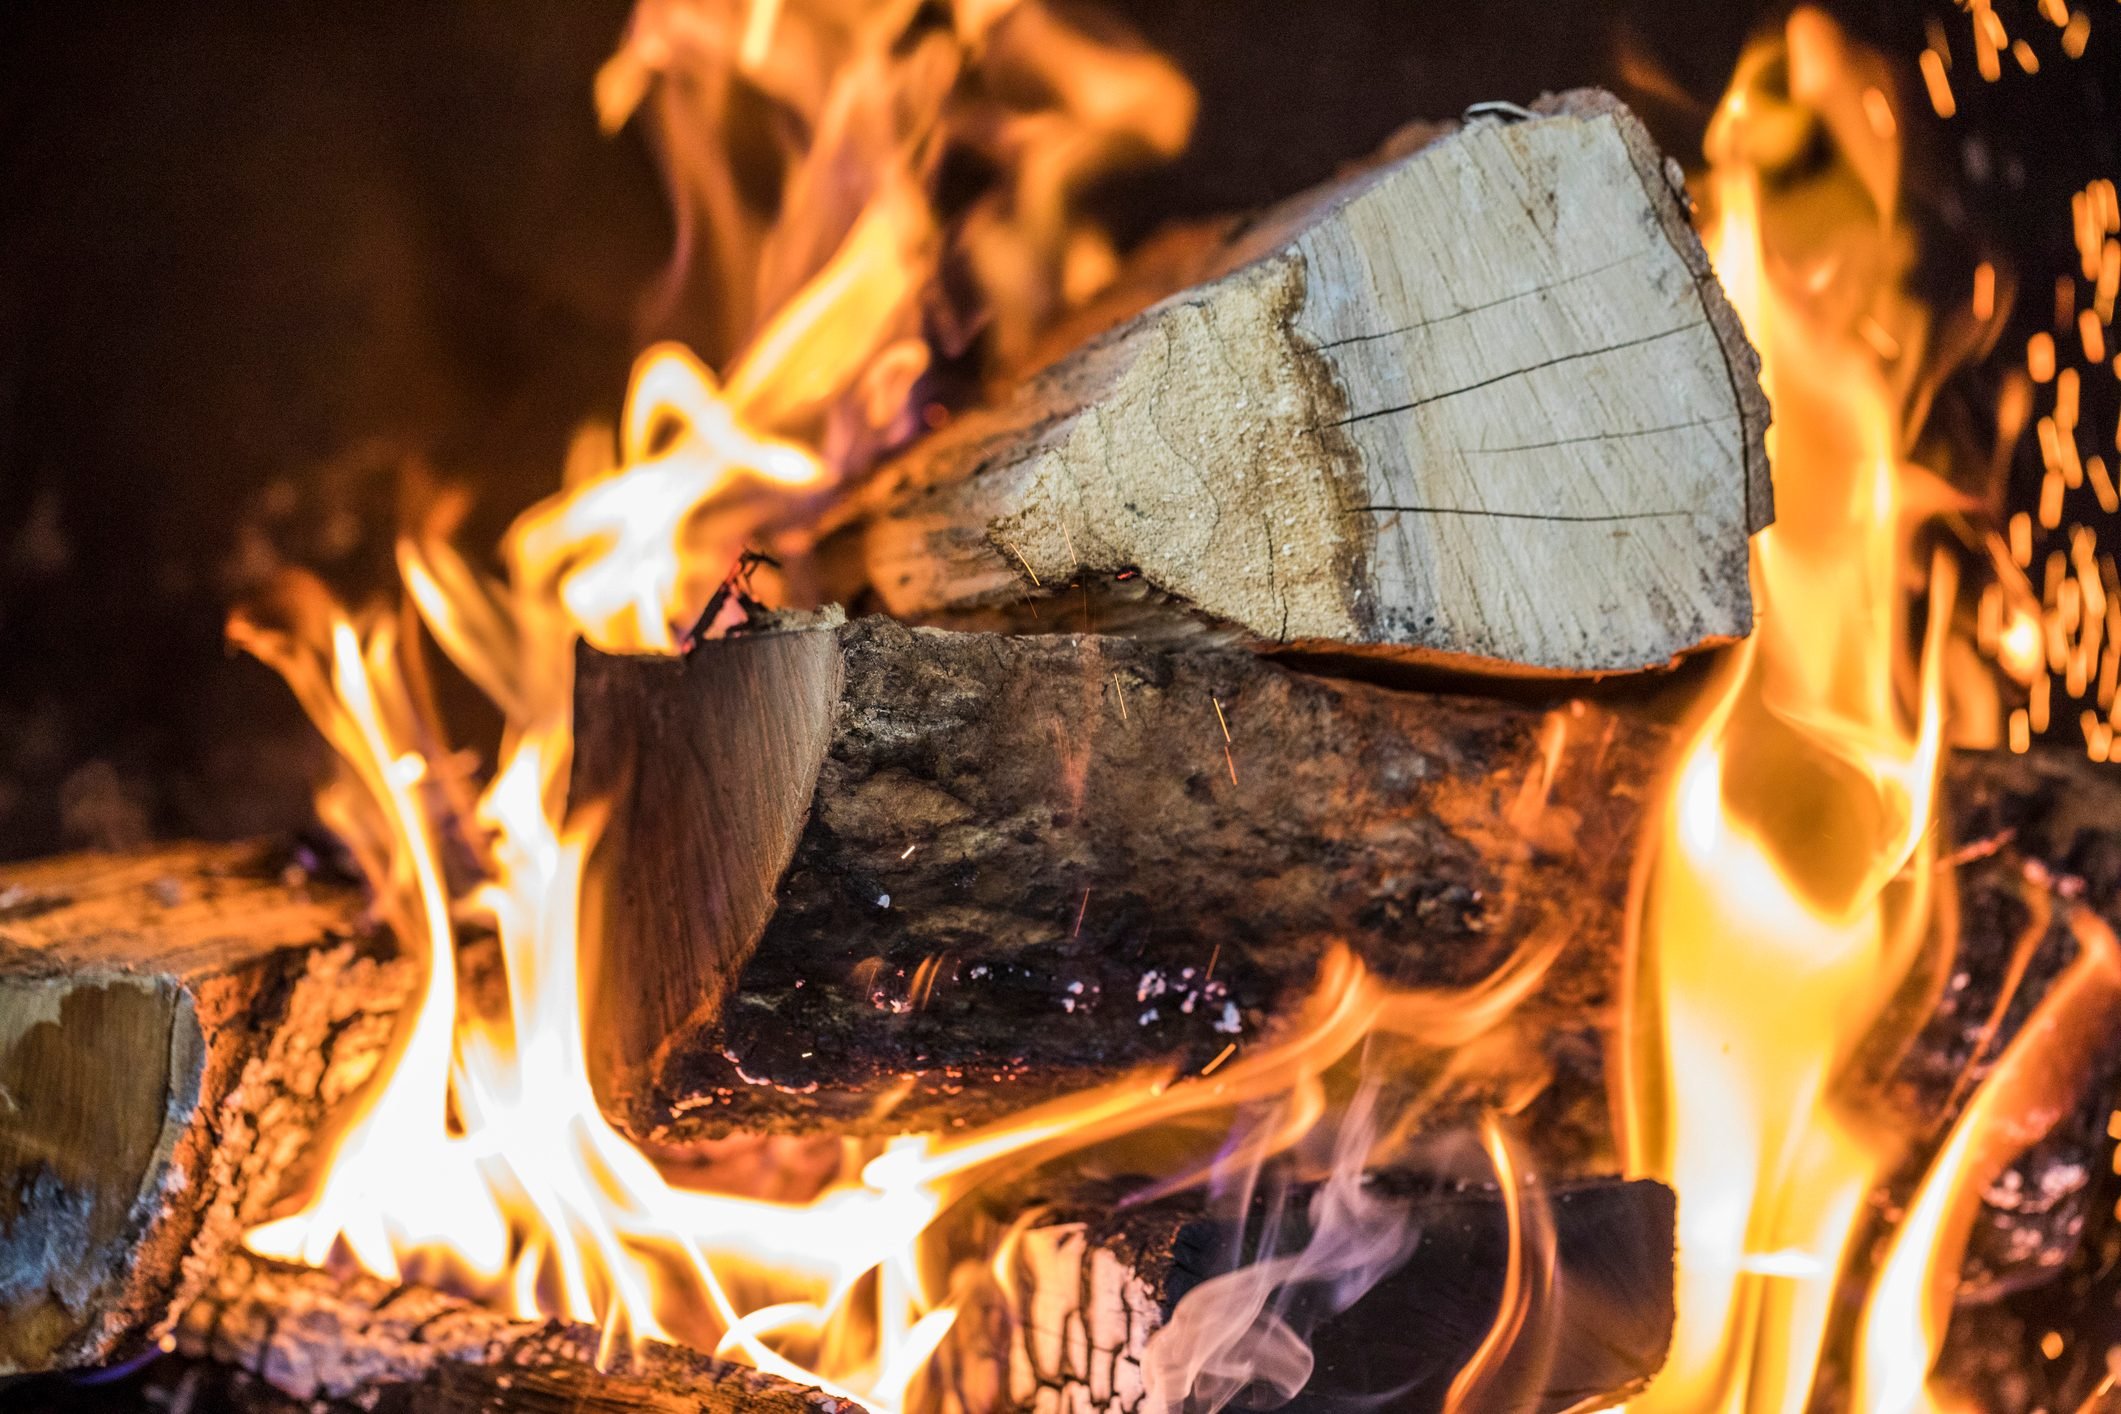 How long do fire logs take to dry?